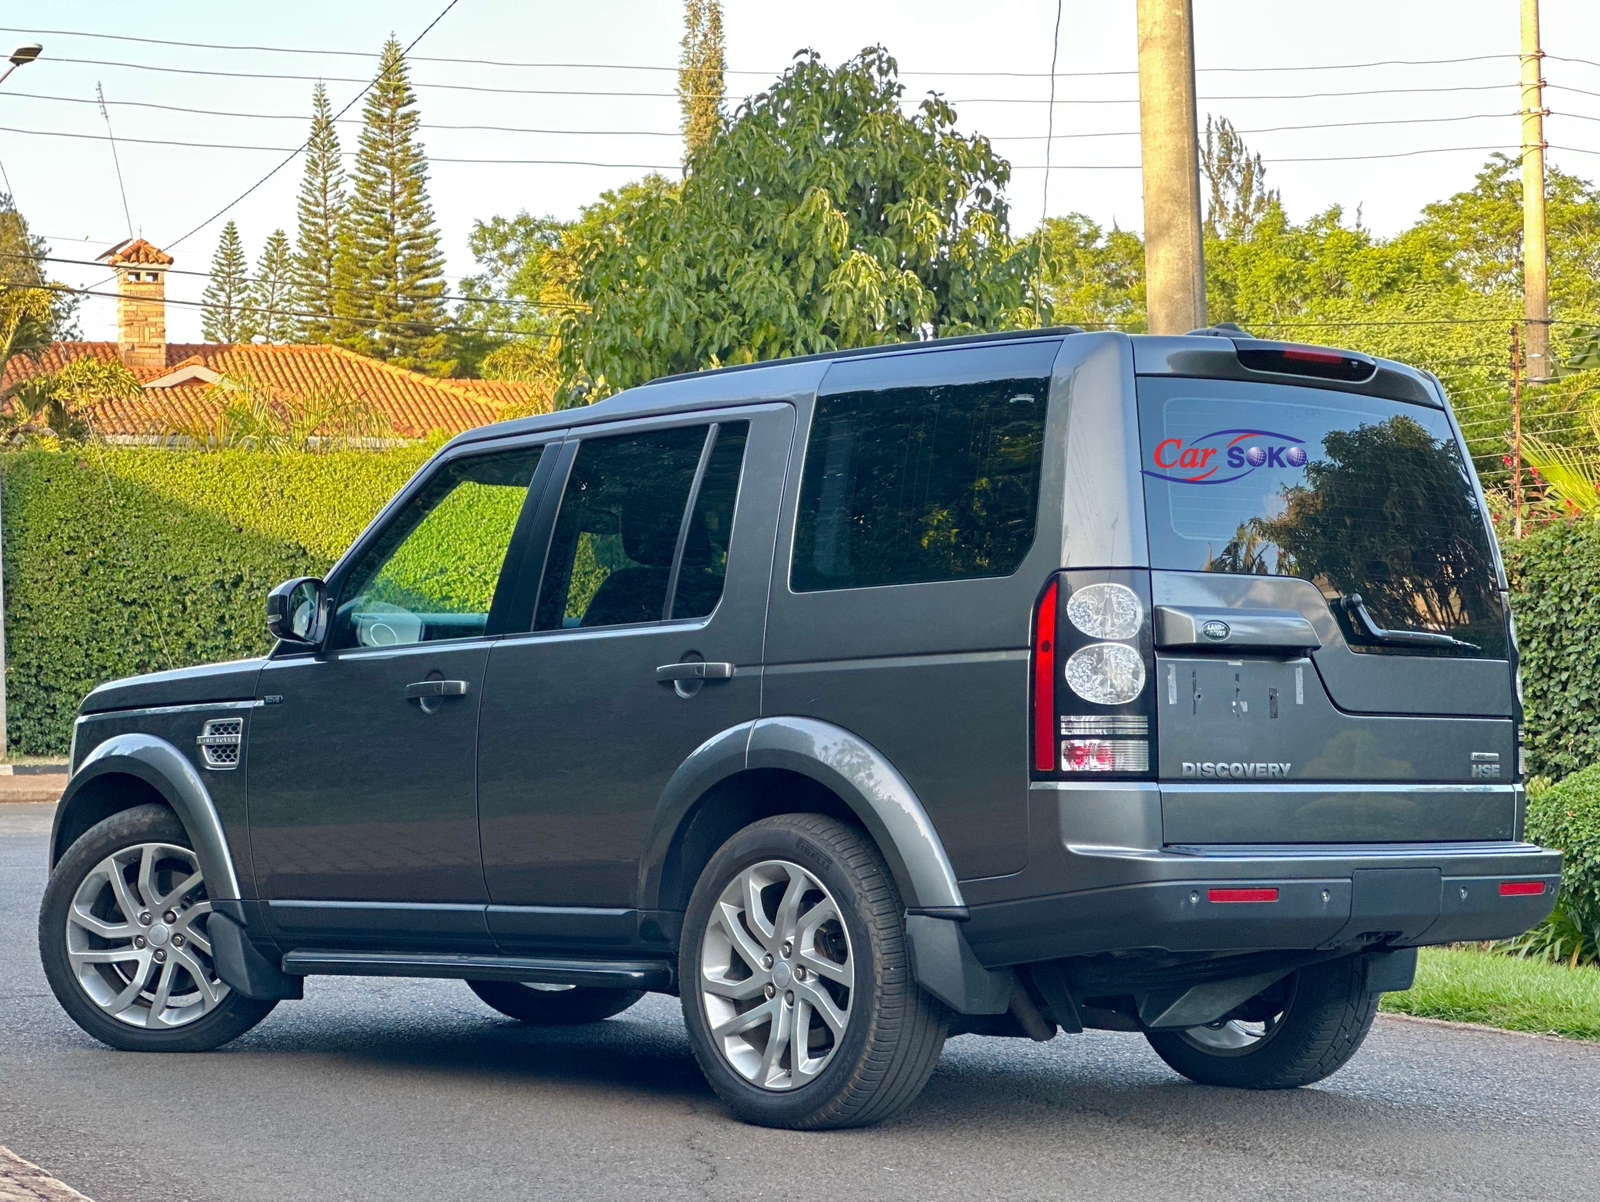 2015-land-rover-Discovery IV-1149